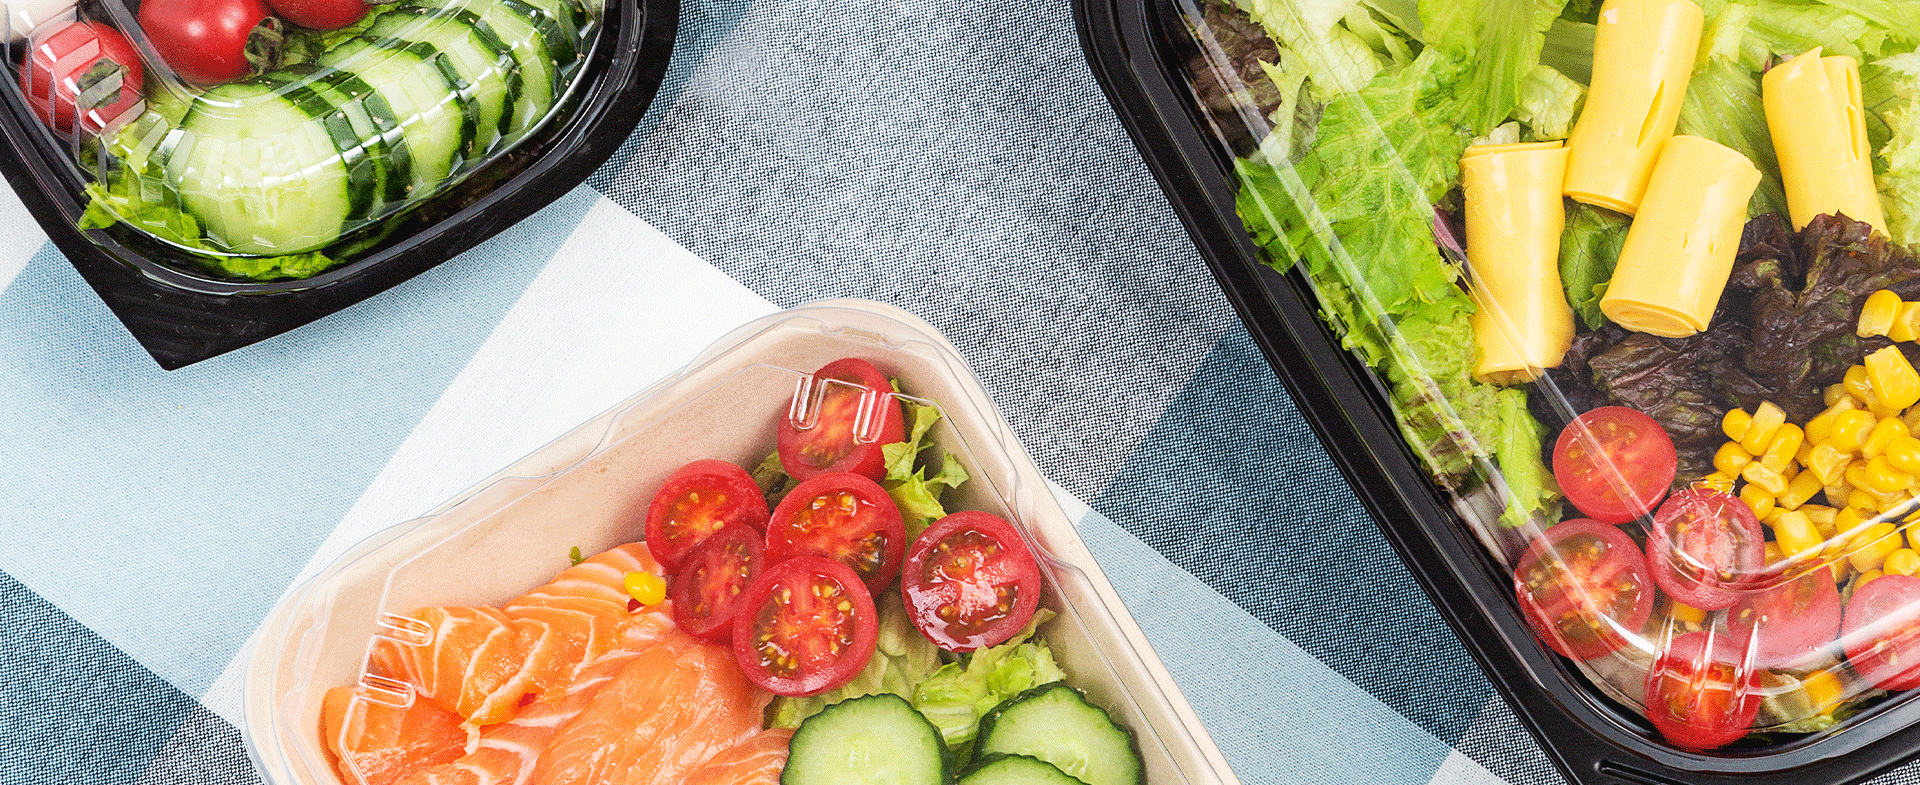 How To Make Disposable Salad Container?